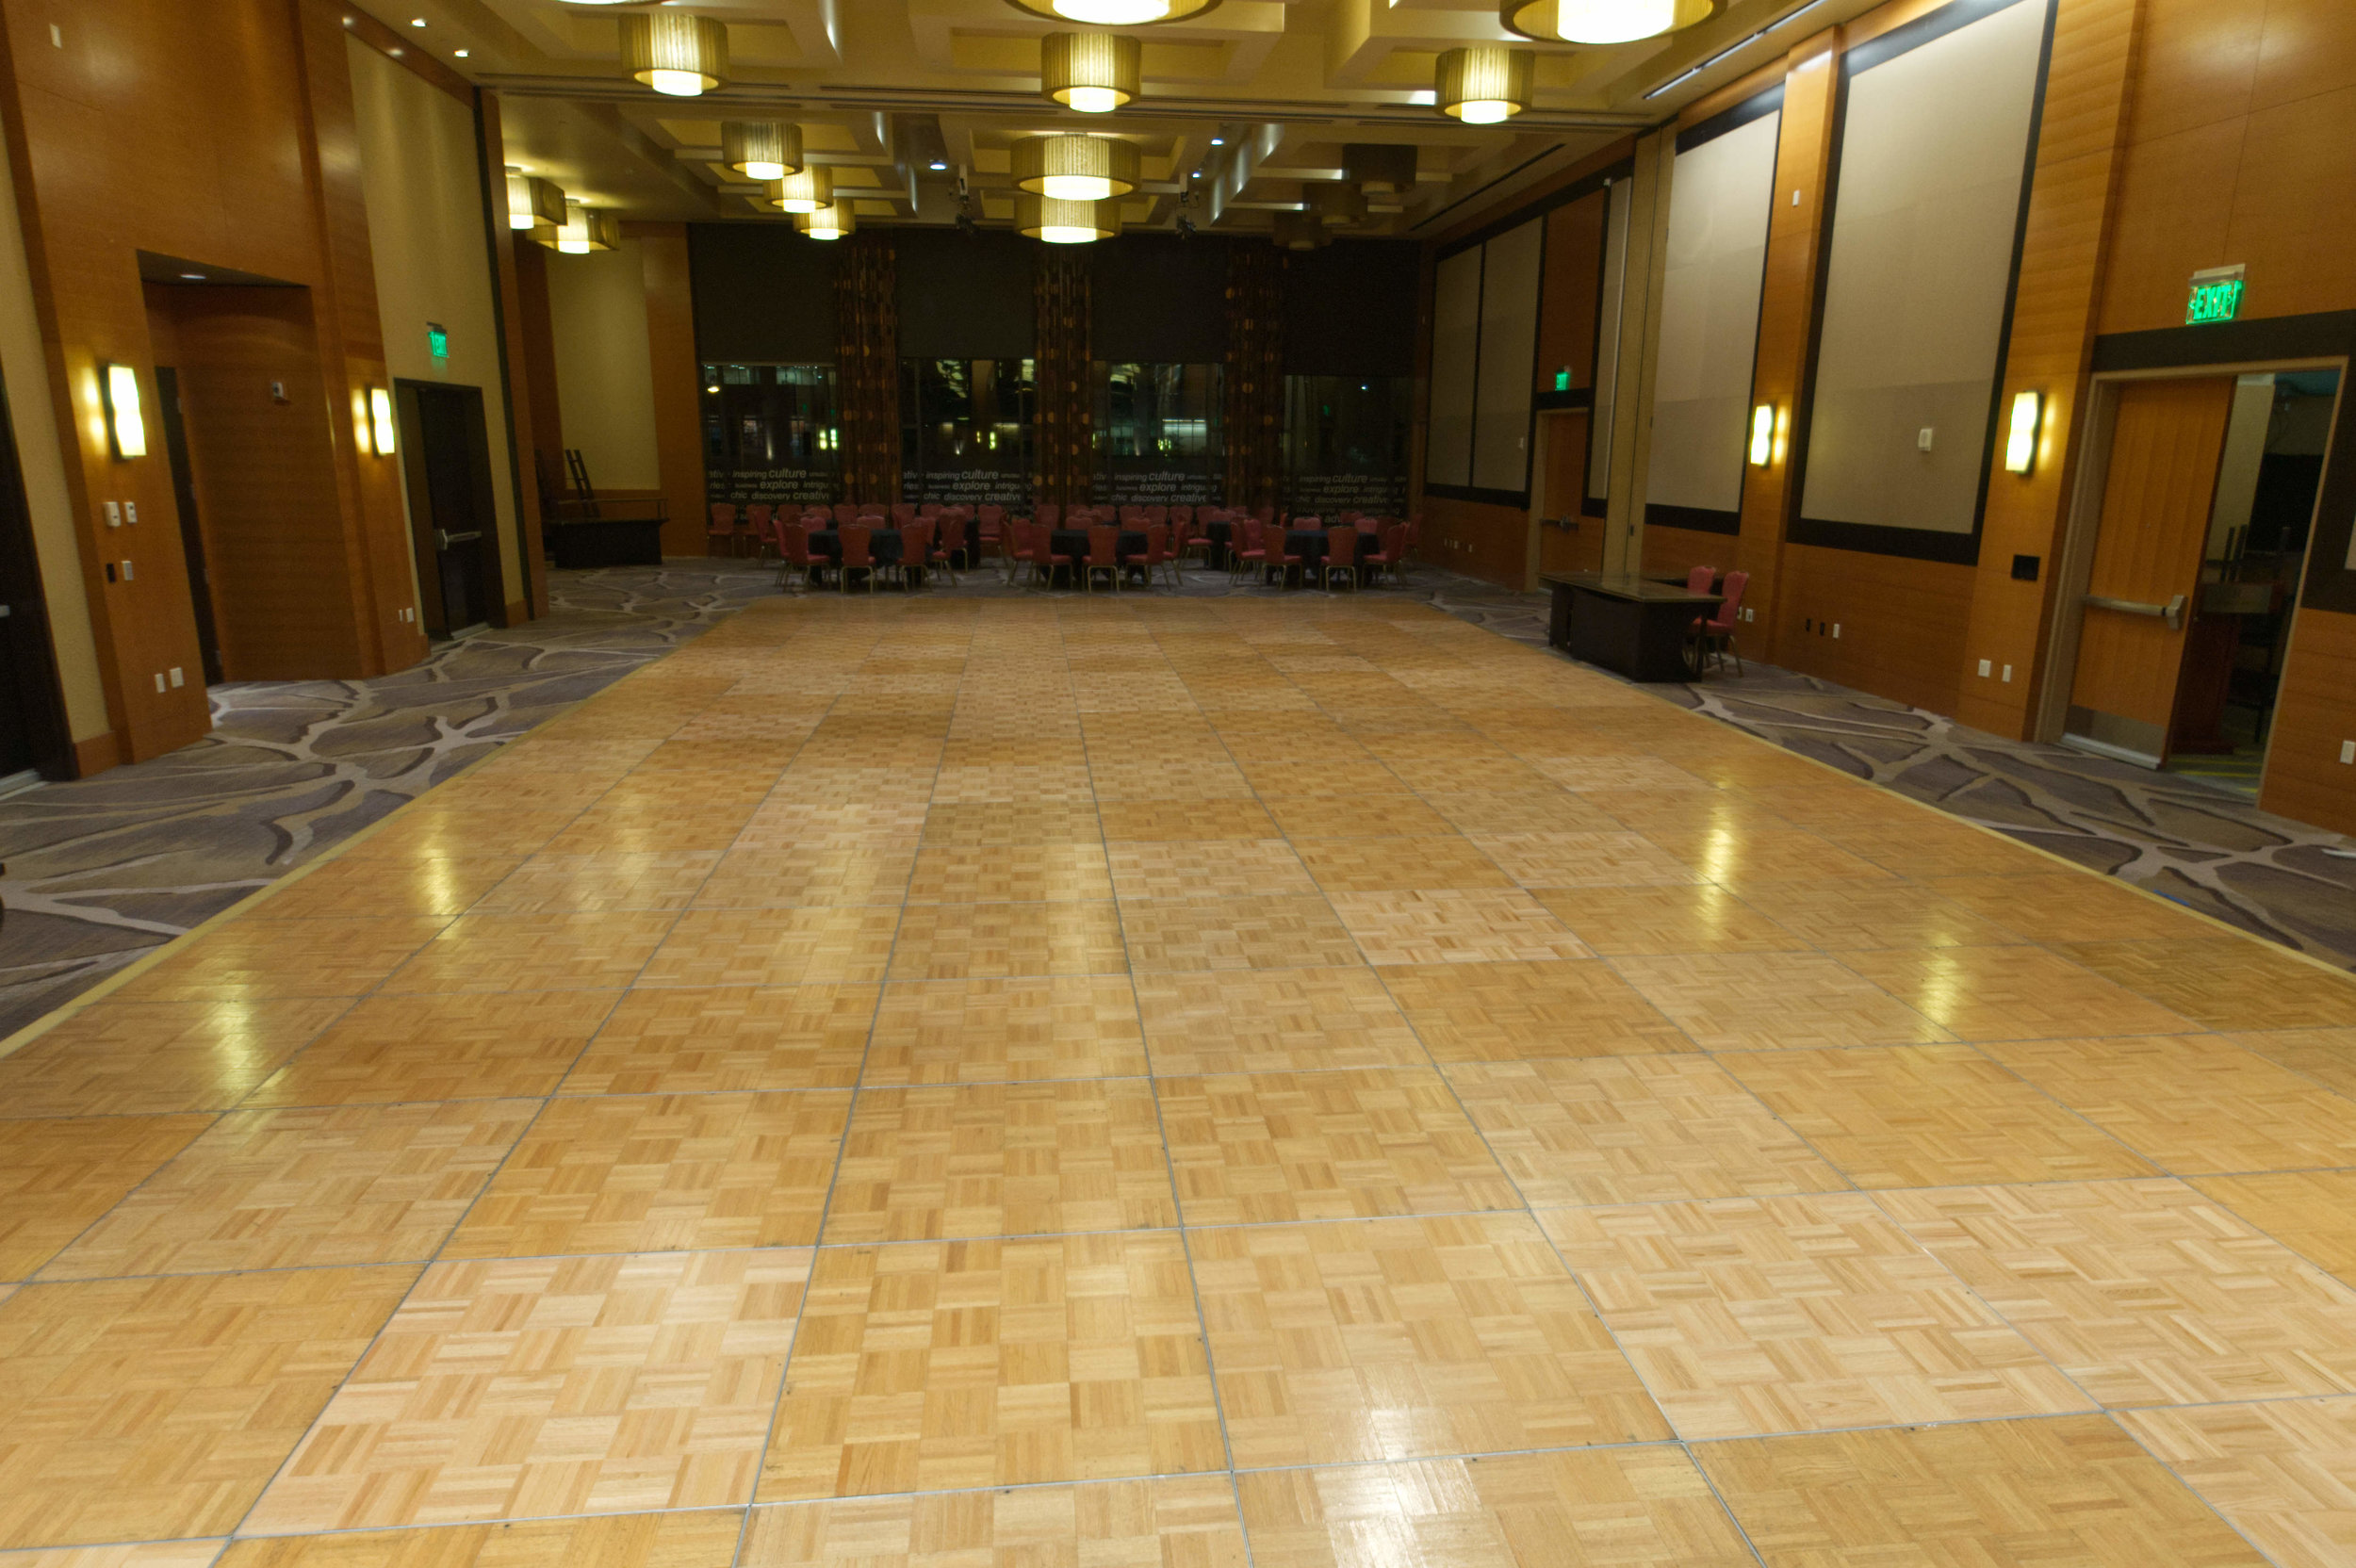  27’ by 60’ oak dance floor for the  Emerald City Hoedown , put on by  Rain Country Dance Association  